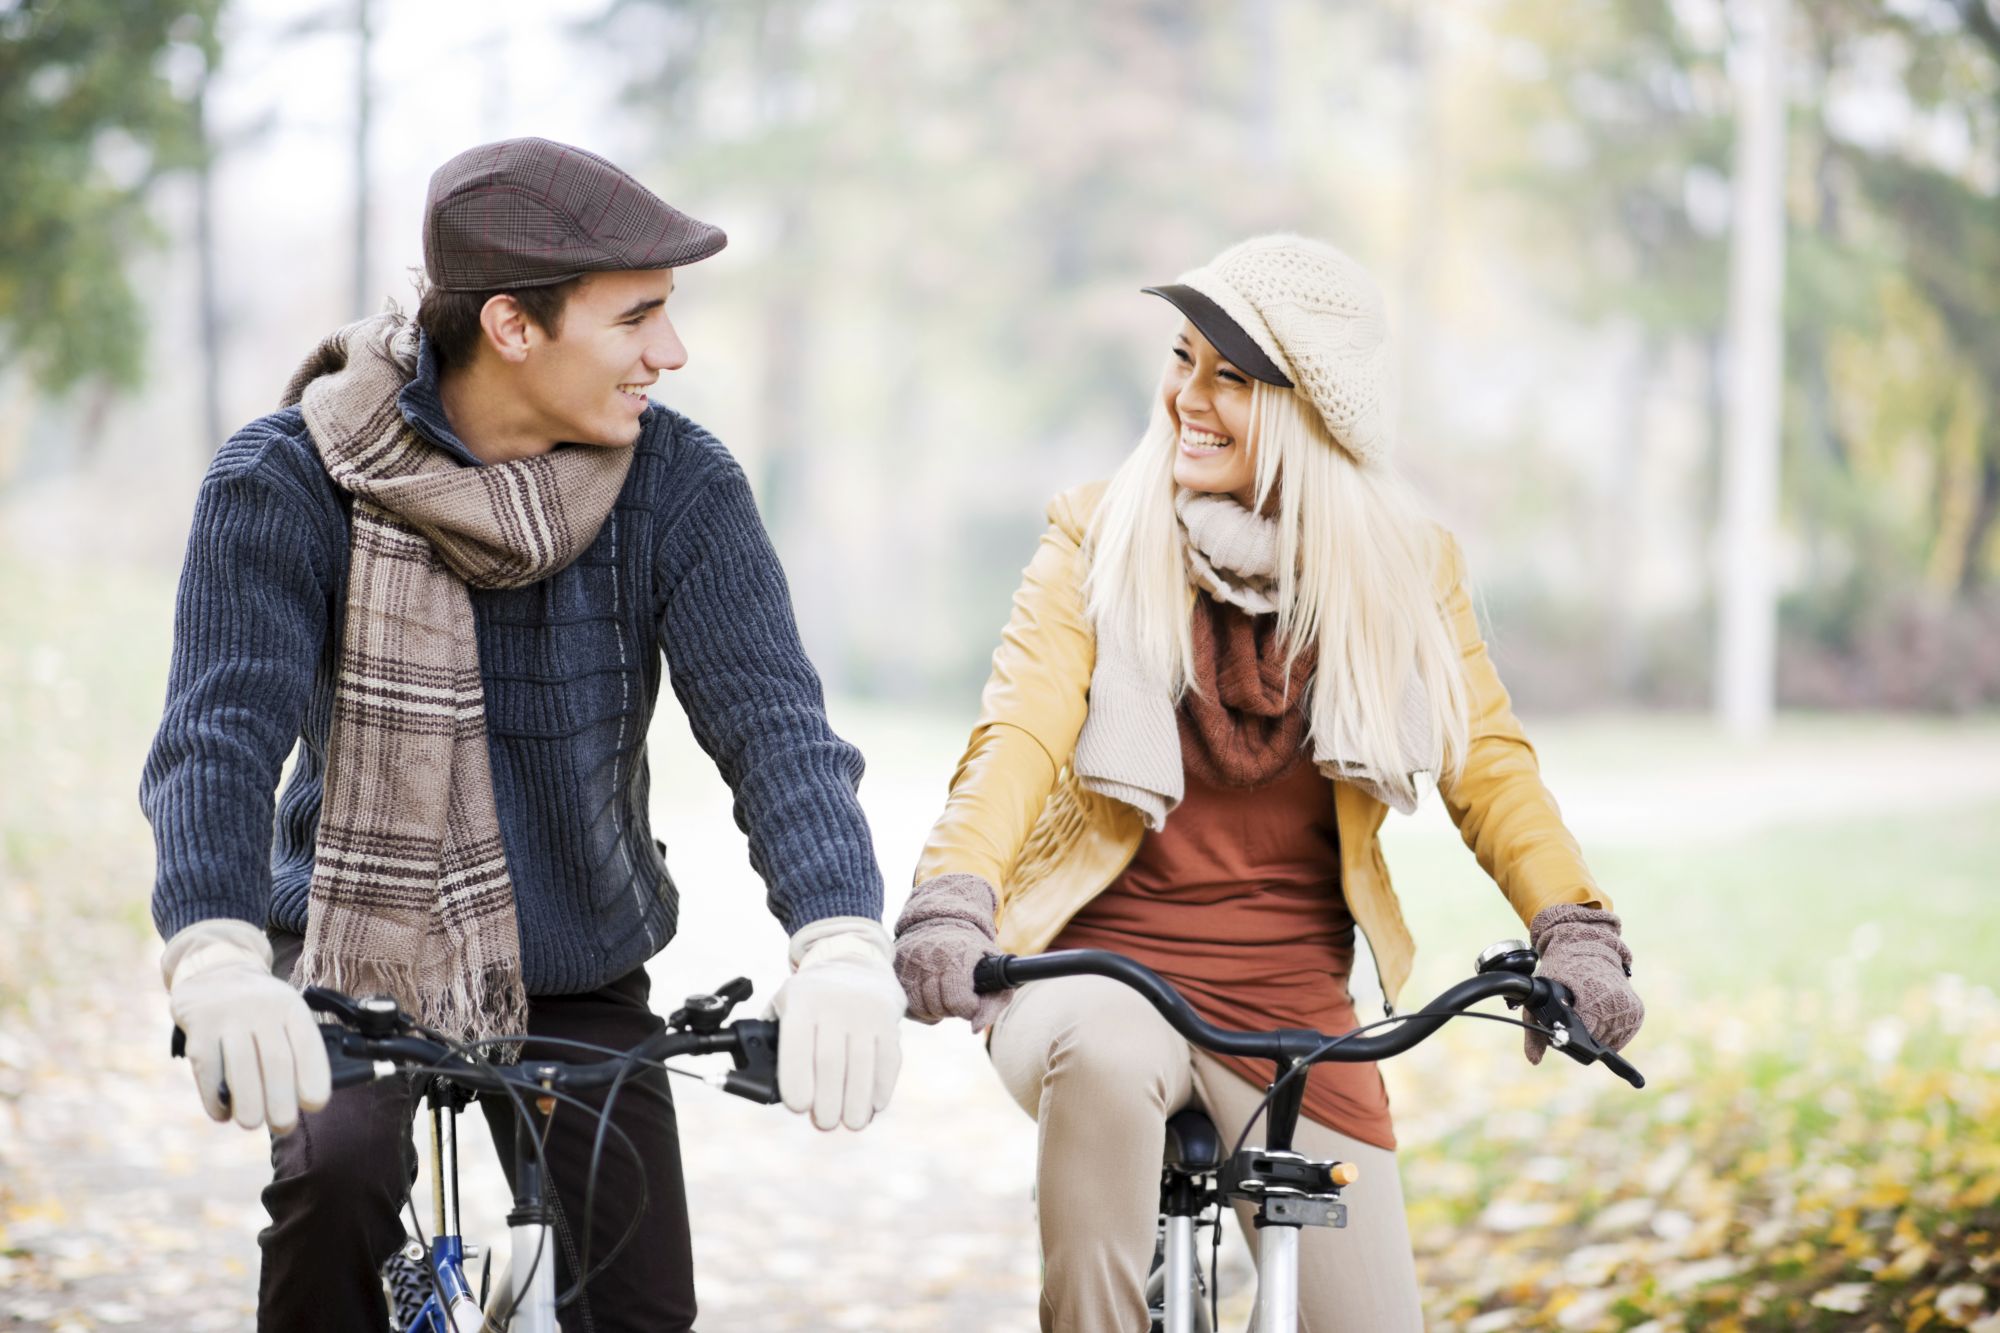 Beautiful day in the park, two young people riding bikes. [url=http://www.istockphoto.com/search/lightbox/9786786][img]http://dl.dropbox.com/u/40117171/couples.jpg[/img][/url]